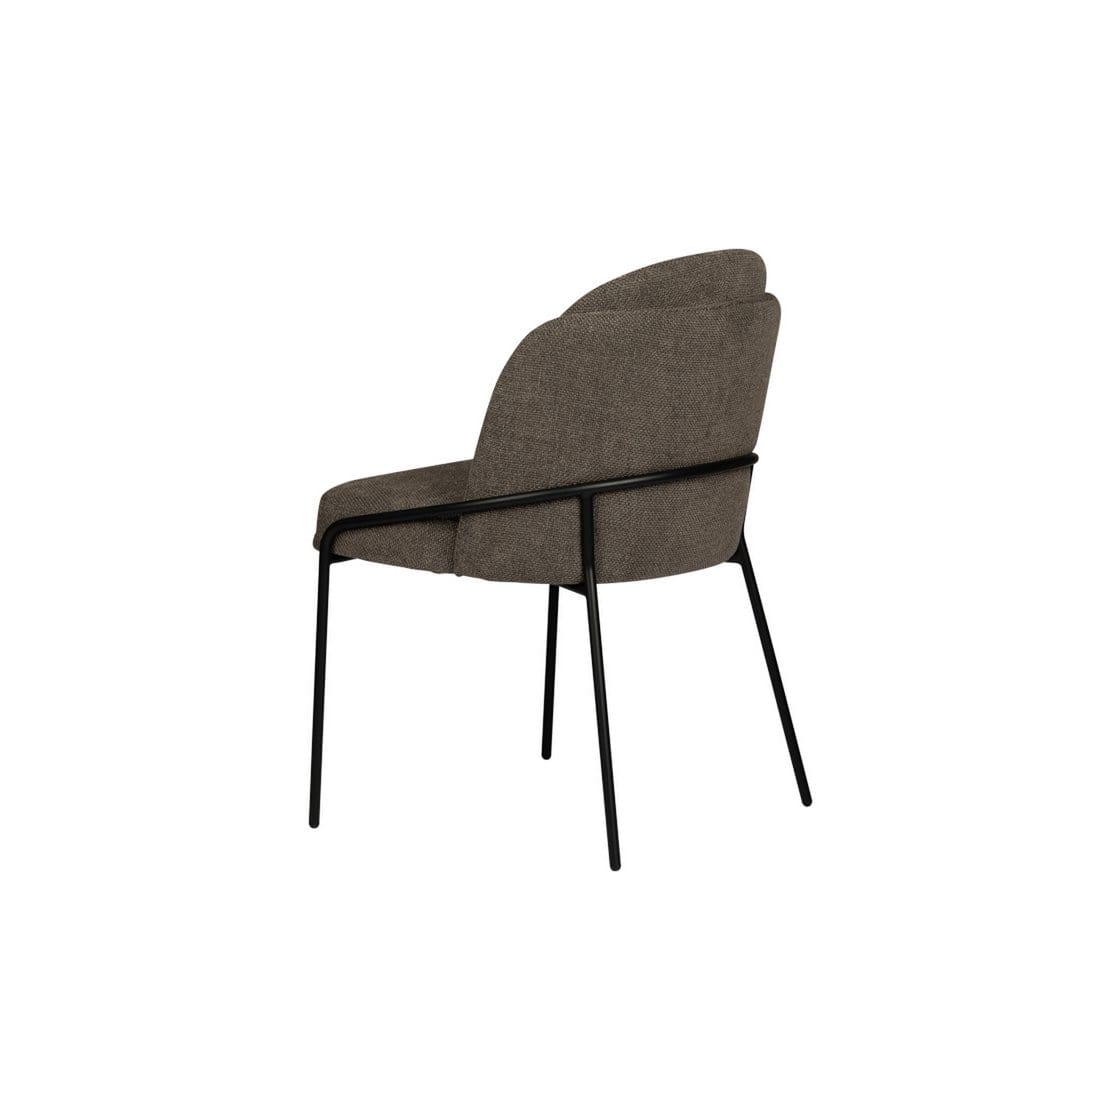 Pole To Pole Fjord chair Taupe (Set of 2)